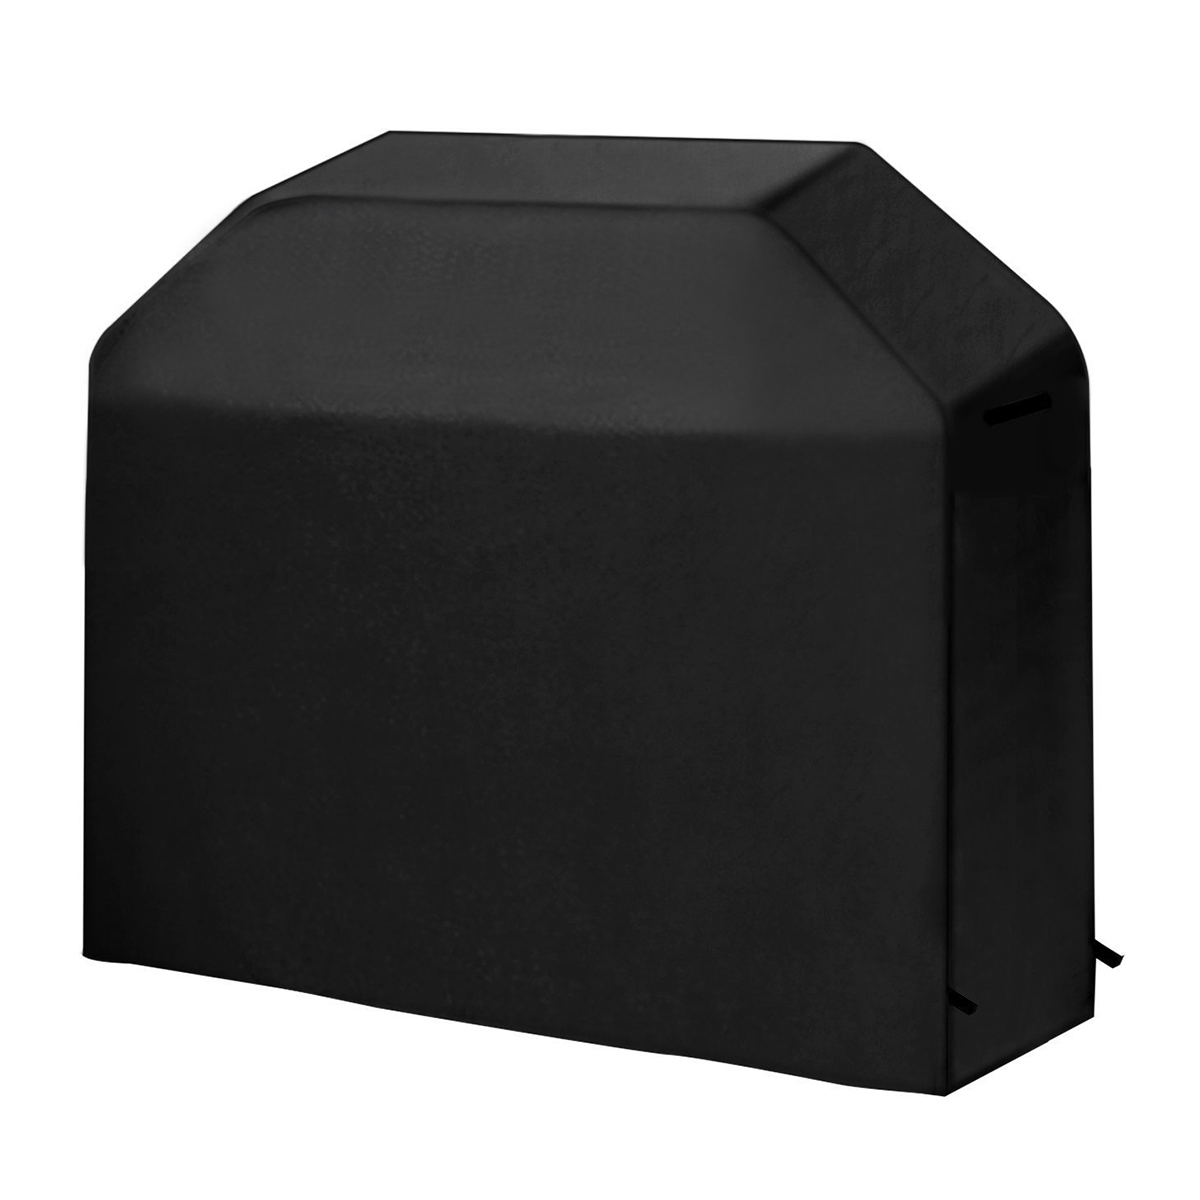 

58 Inch Waterproof BBQ Grill Cover Canvass PU Coating Tool Storage Bag